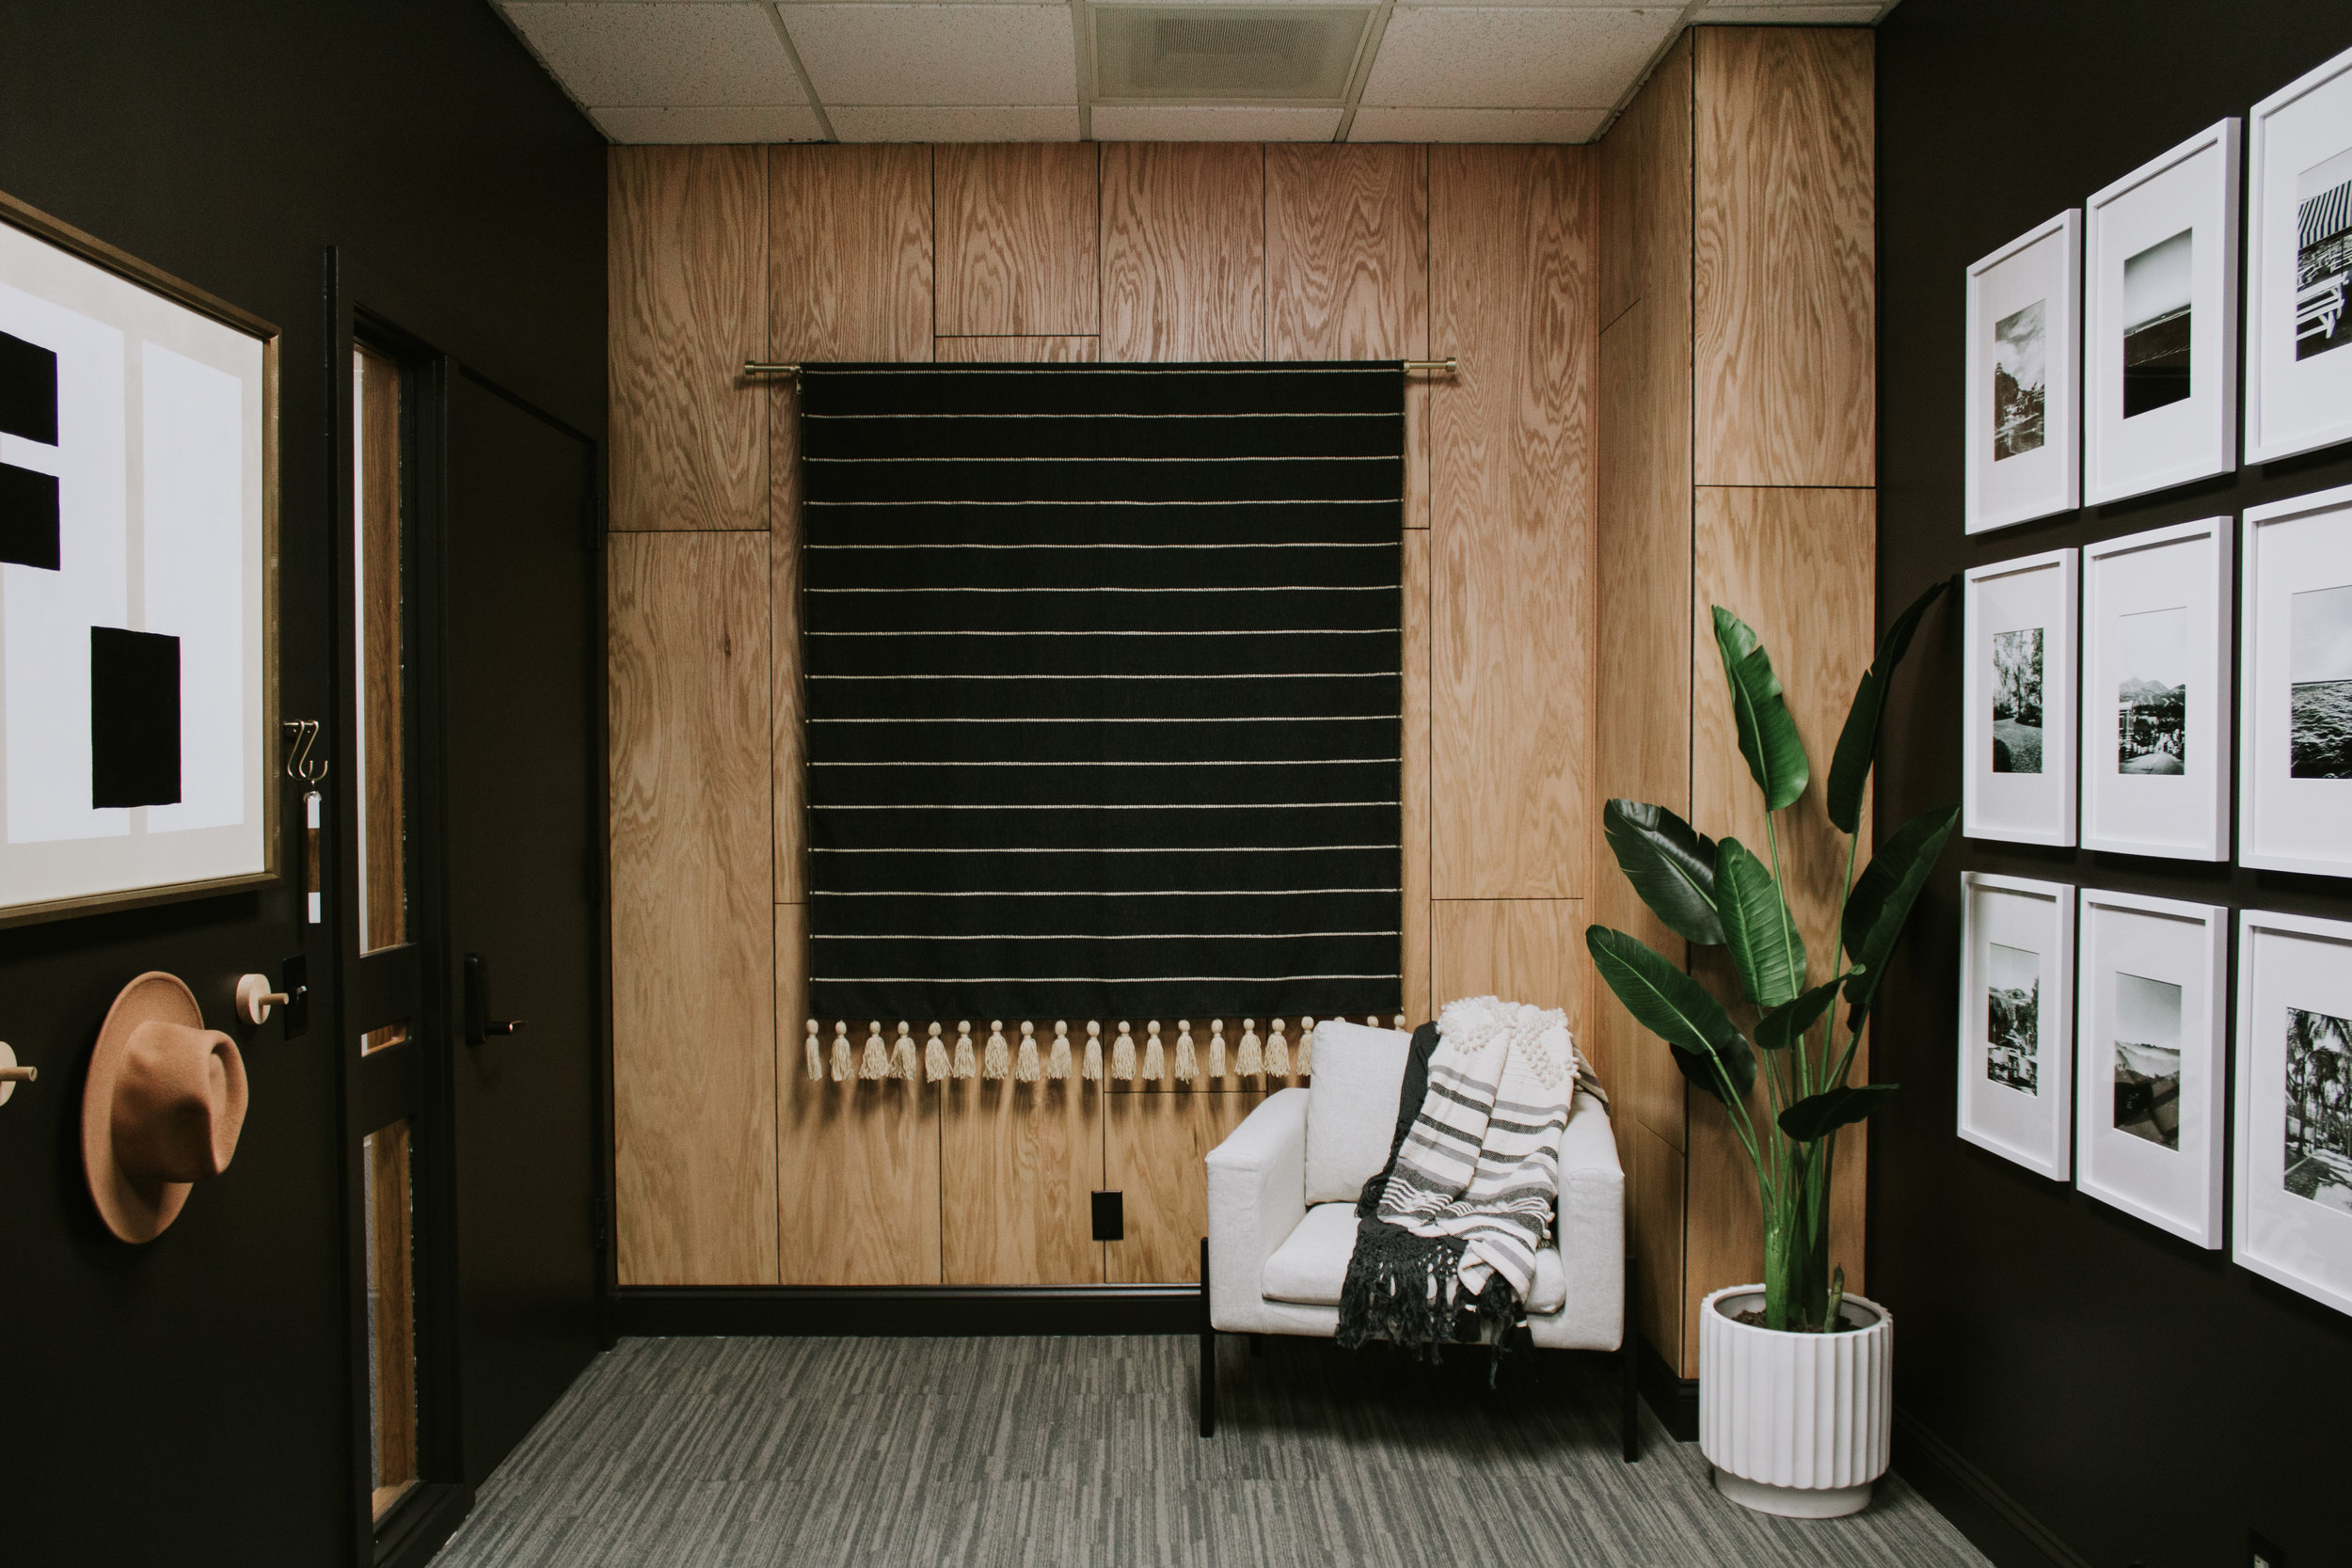 Speak Podcast Studio Reveal! Full transformation and makeover by Nadine Stay. Speak Podcast Studio is located in Lincoln, Nebraska. A podcast recording studio. Modern & moody office makeover with black walls, oak wood accent wall, and modern artwork…